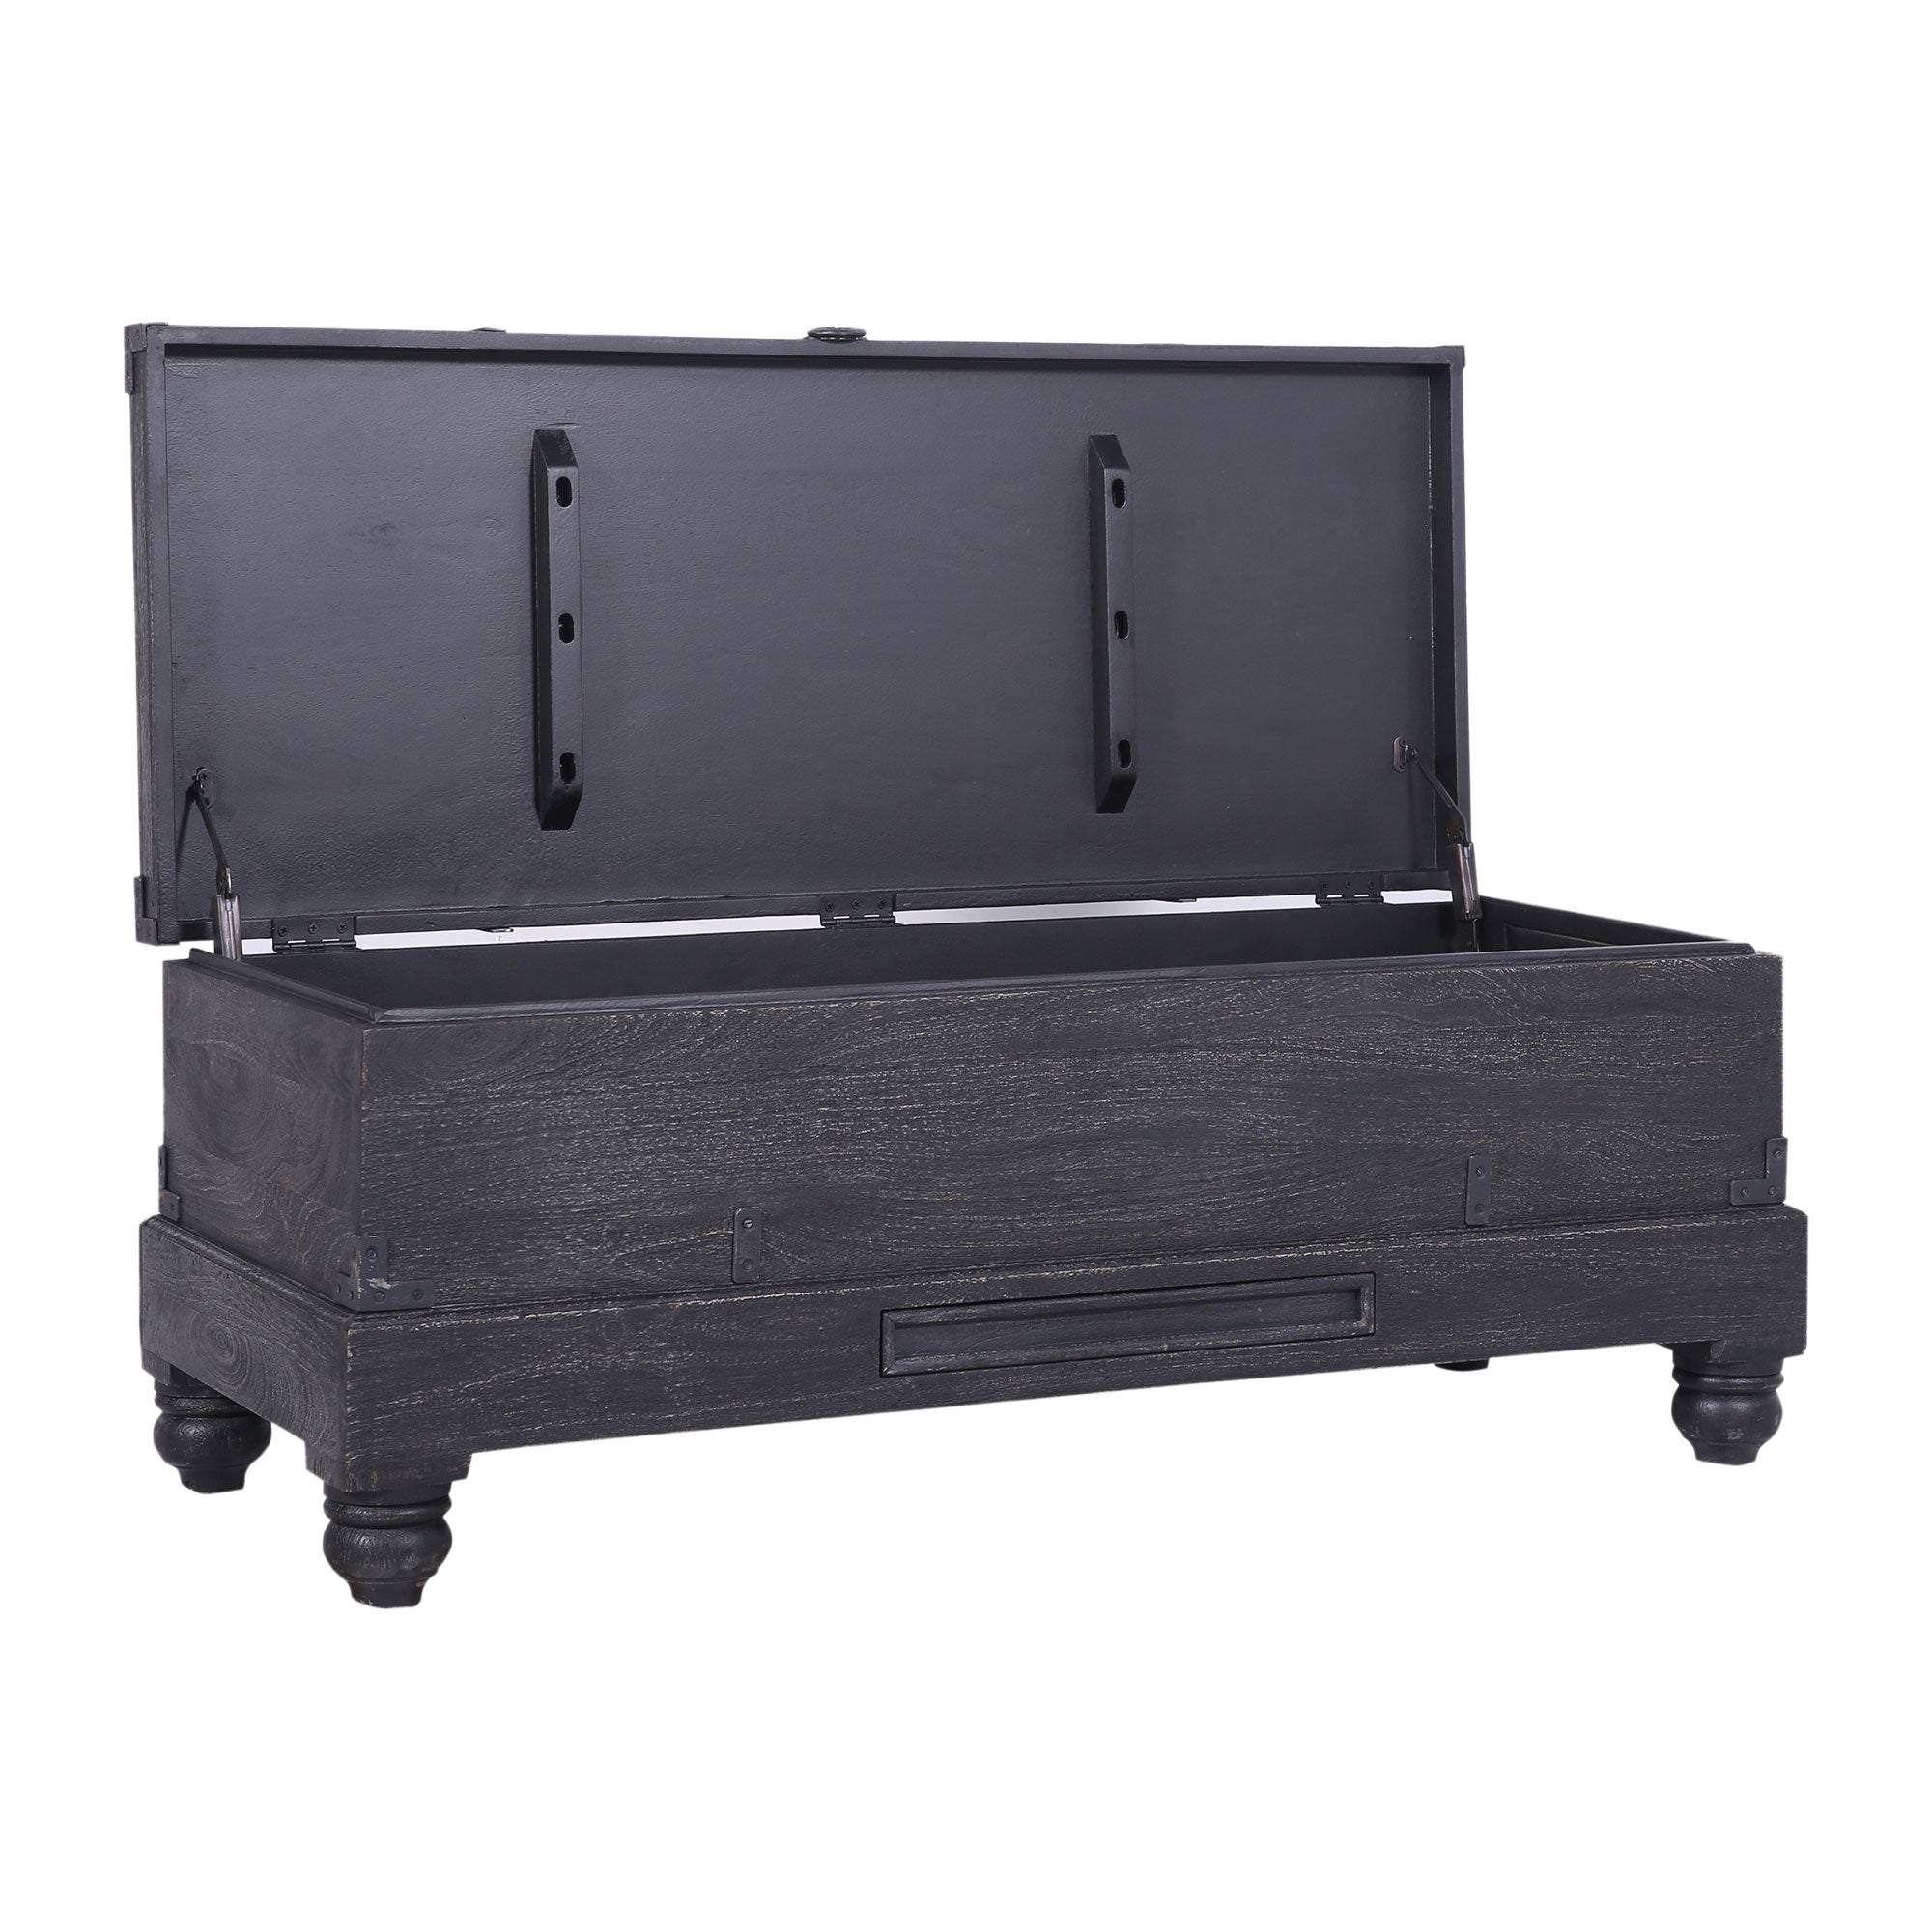 Nerio Nomad Wooden Storage Bench in Black Distressed Finish in Ottomans & Benches by VMInnovations